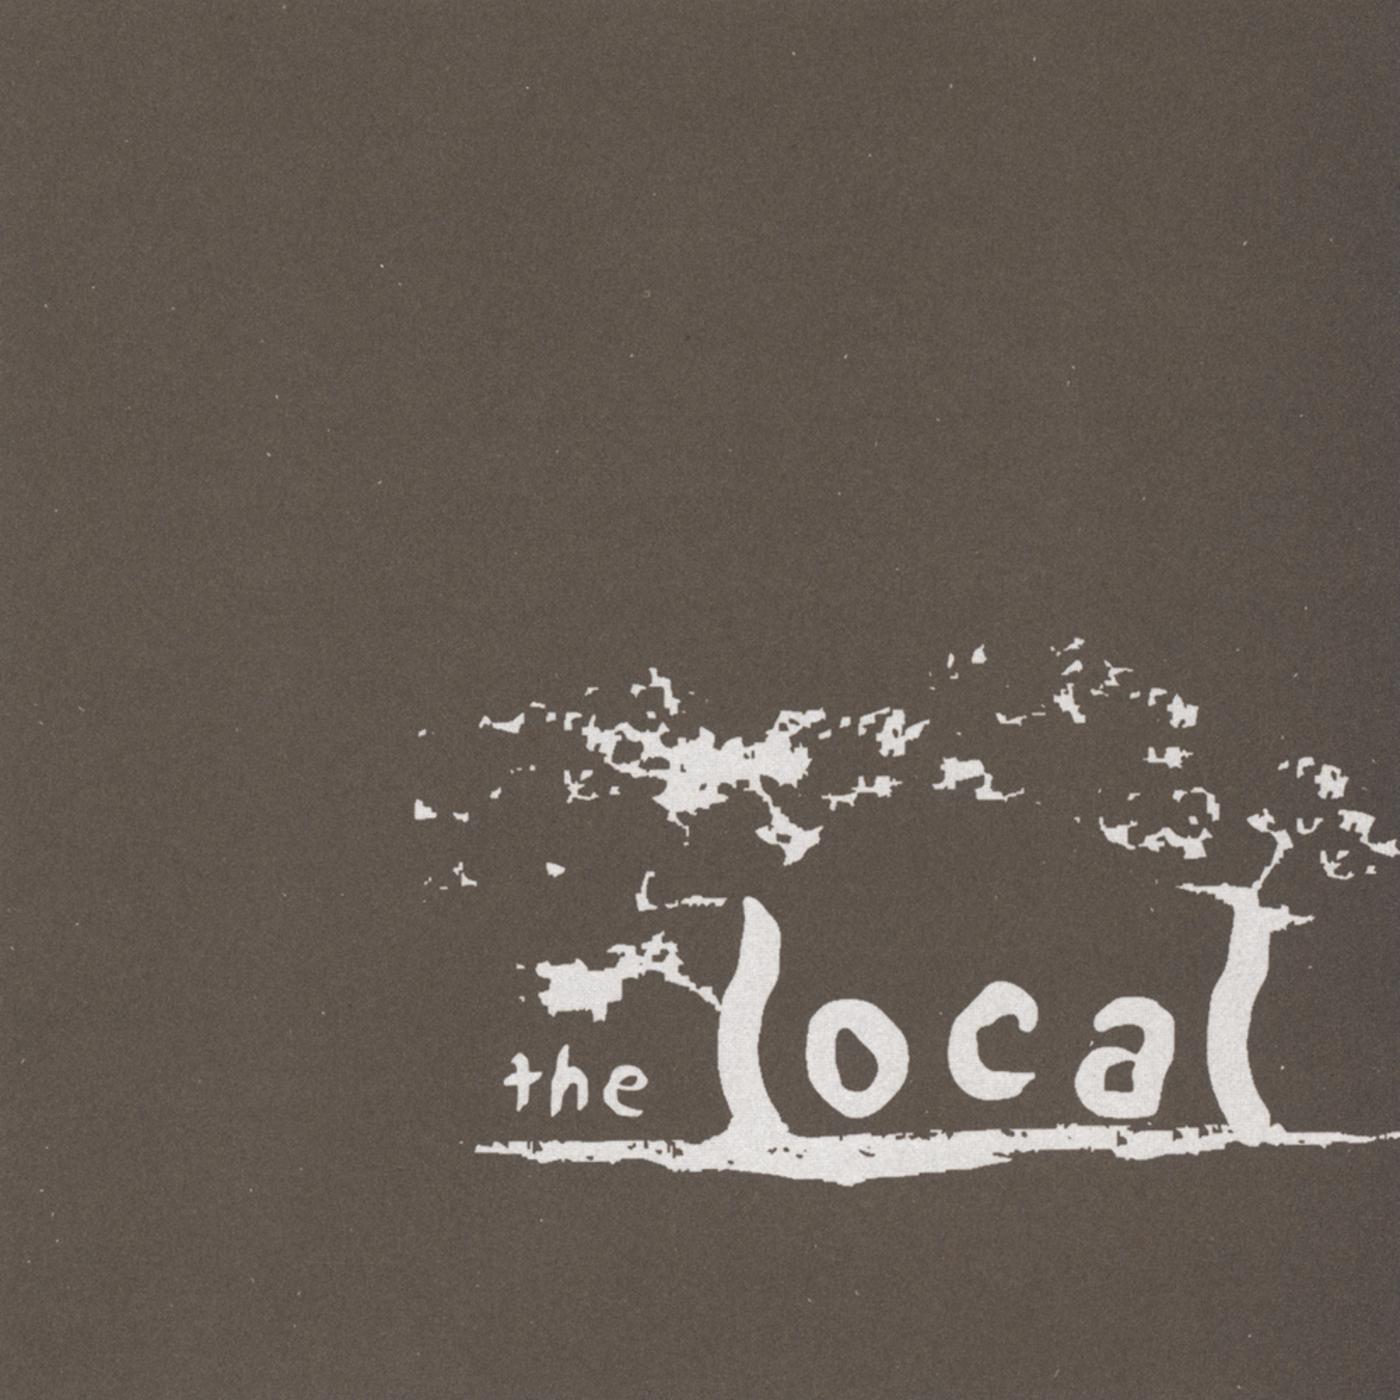 The Local - London Fly Away